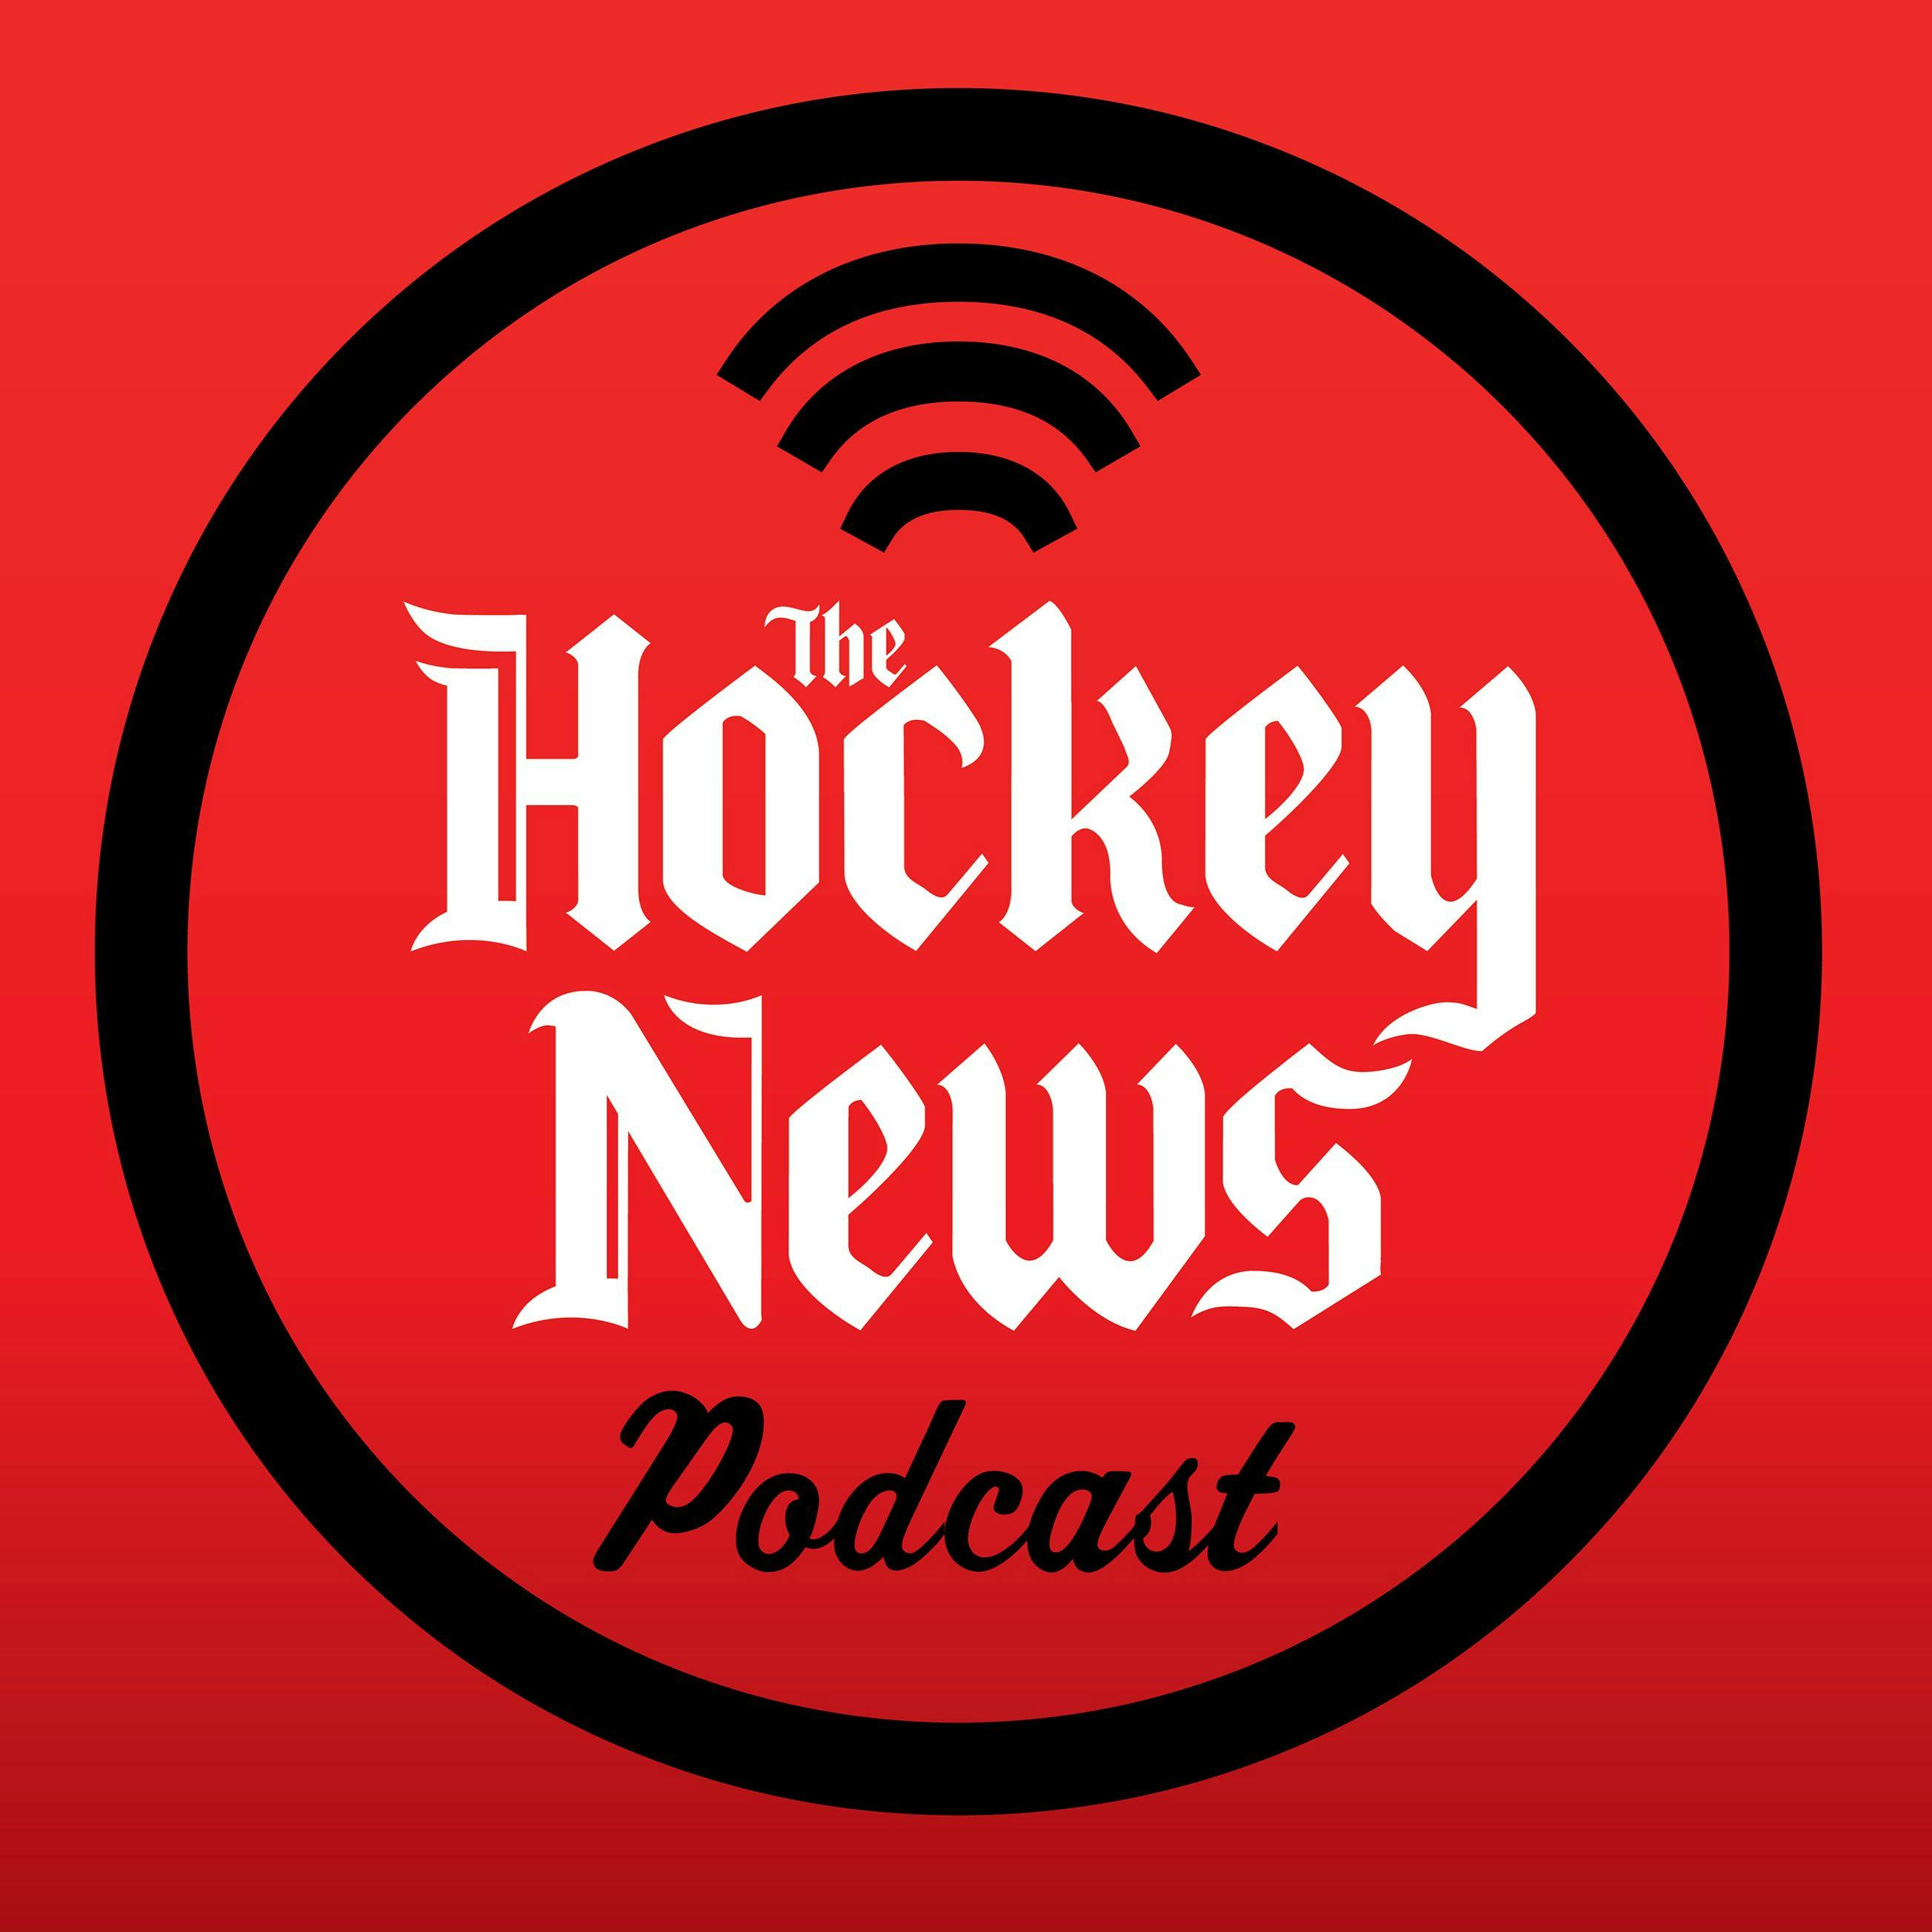 The Hockey News Podcast: Shaping Up Opening Night Rosters